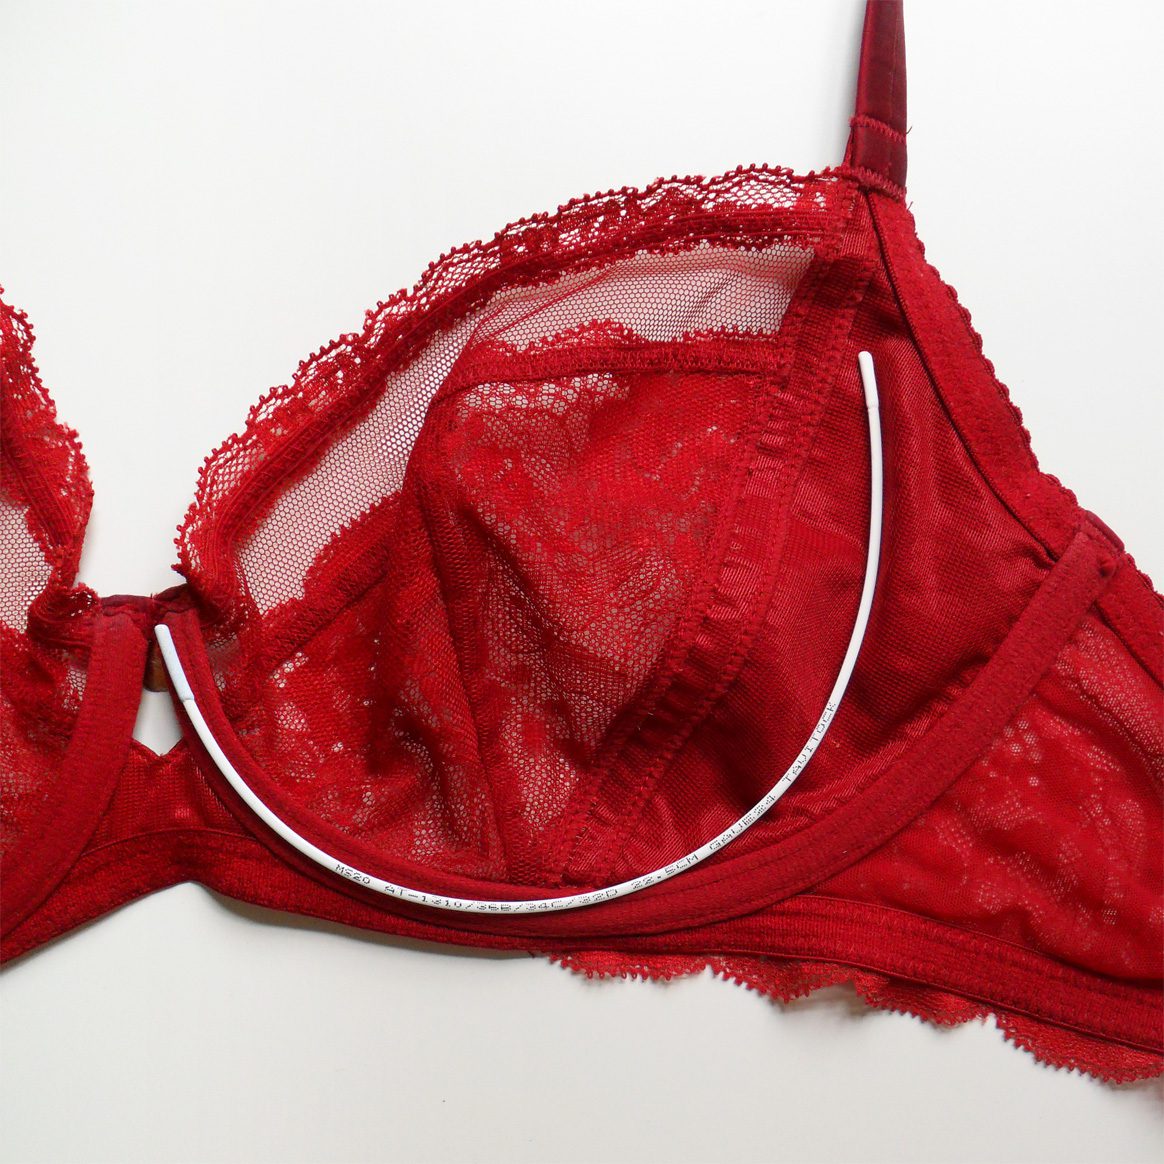 Which type of bra is best? Which is better: an underwired bra or a